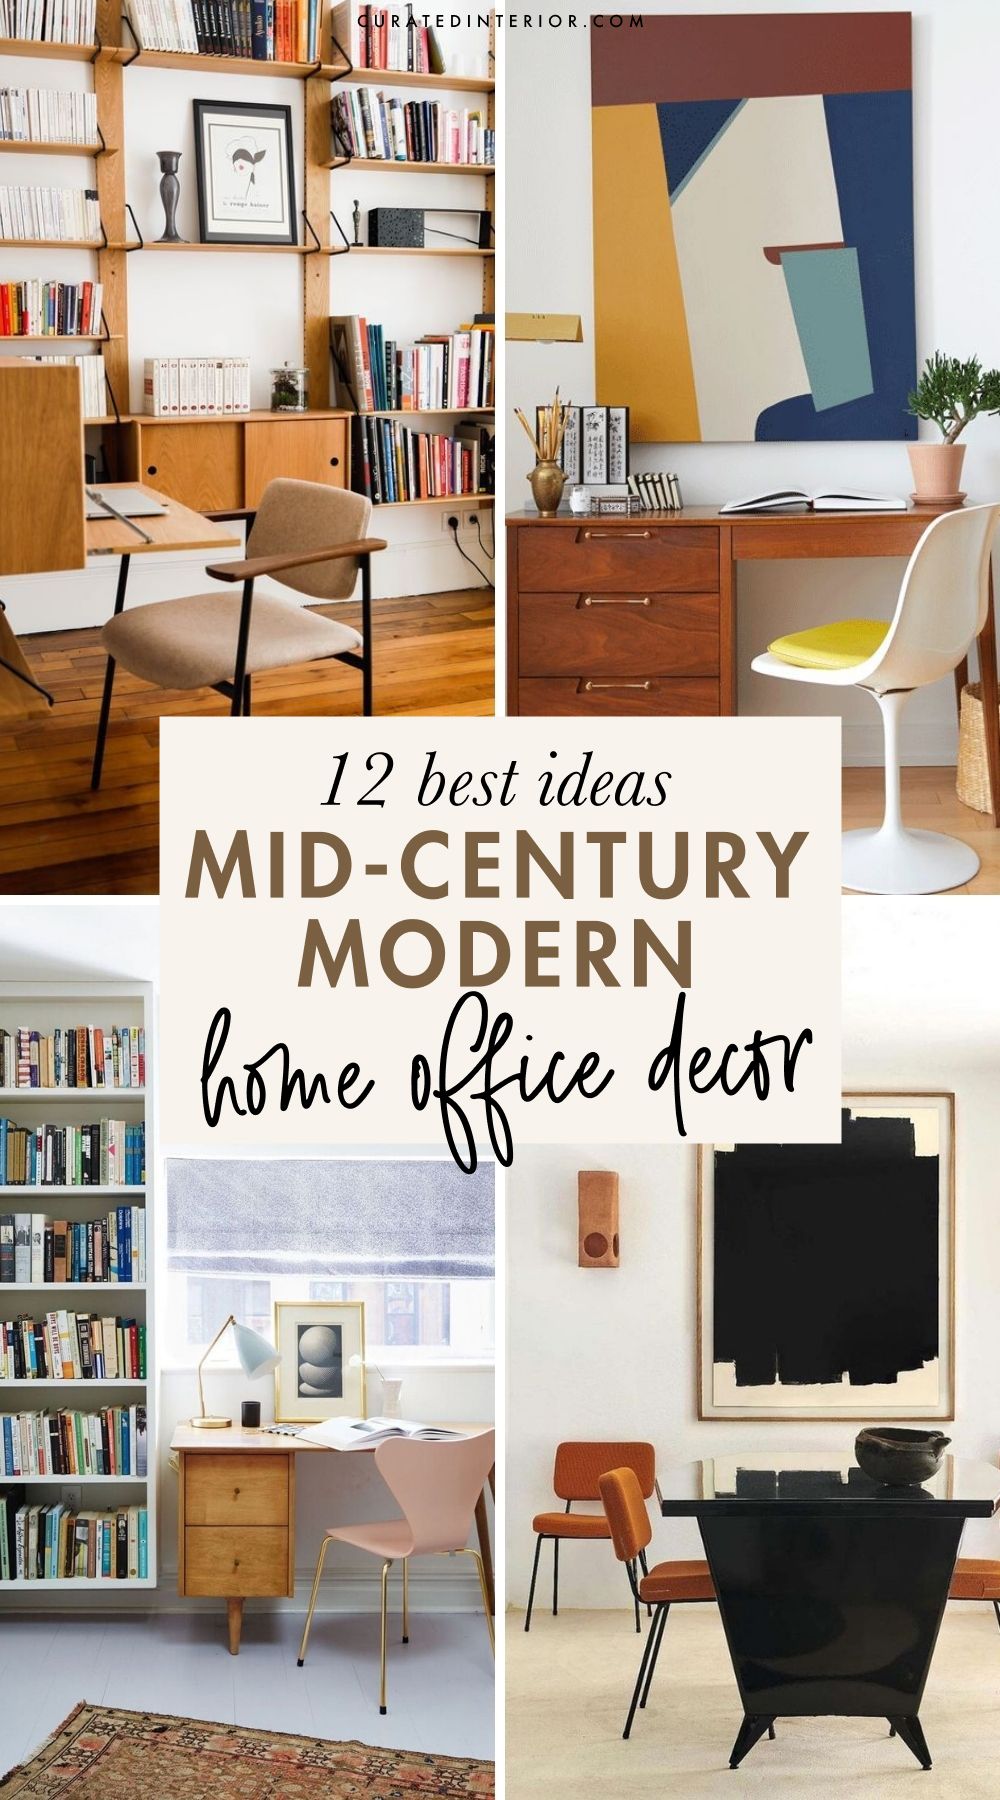 12 best Mid-Century Modern home office decor ideas for designing a practical workspace inspired by retro design!